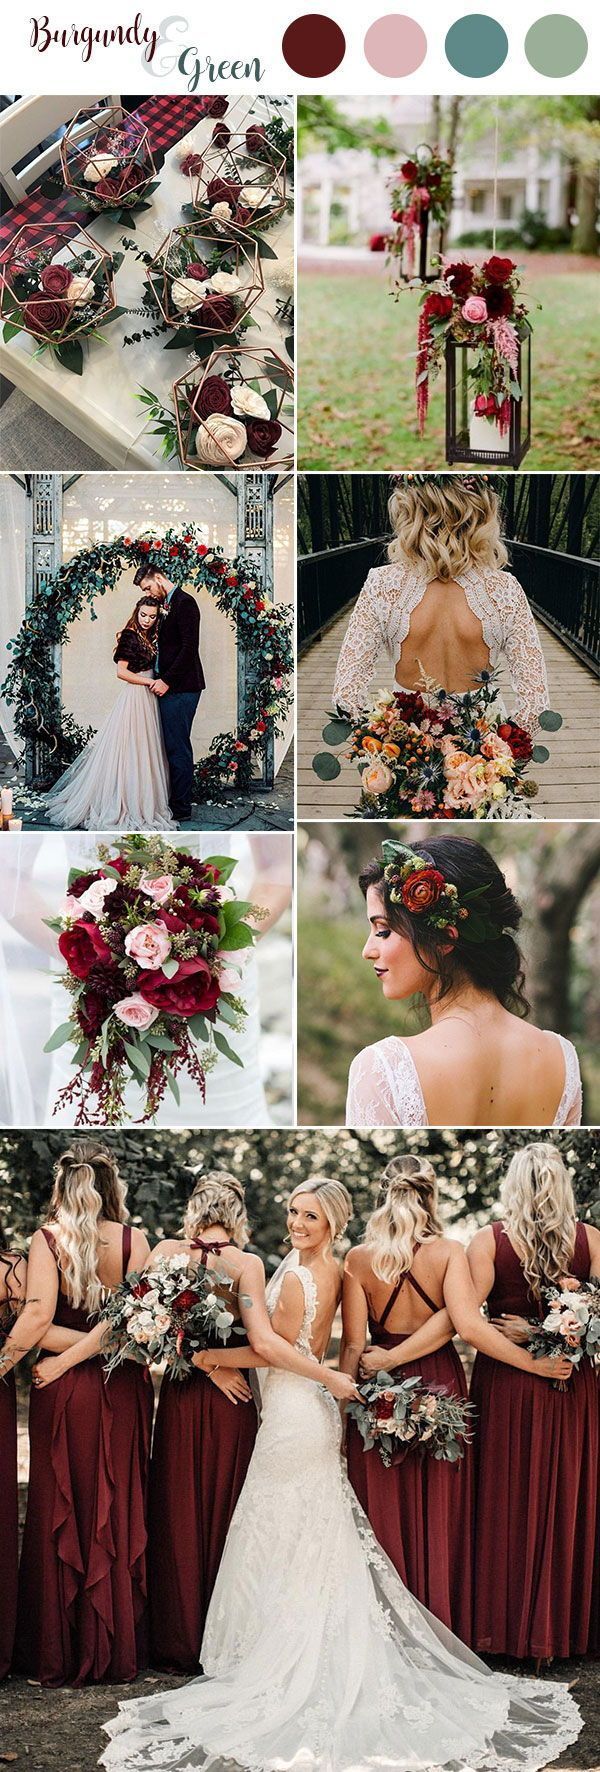 Top 10 Green Wedding Color Ideas For 2019 Trends You'll Love -   16 wedding Burgundy theme ideas